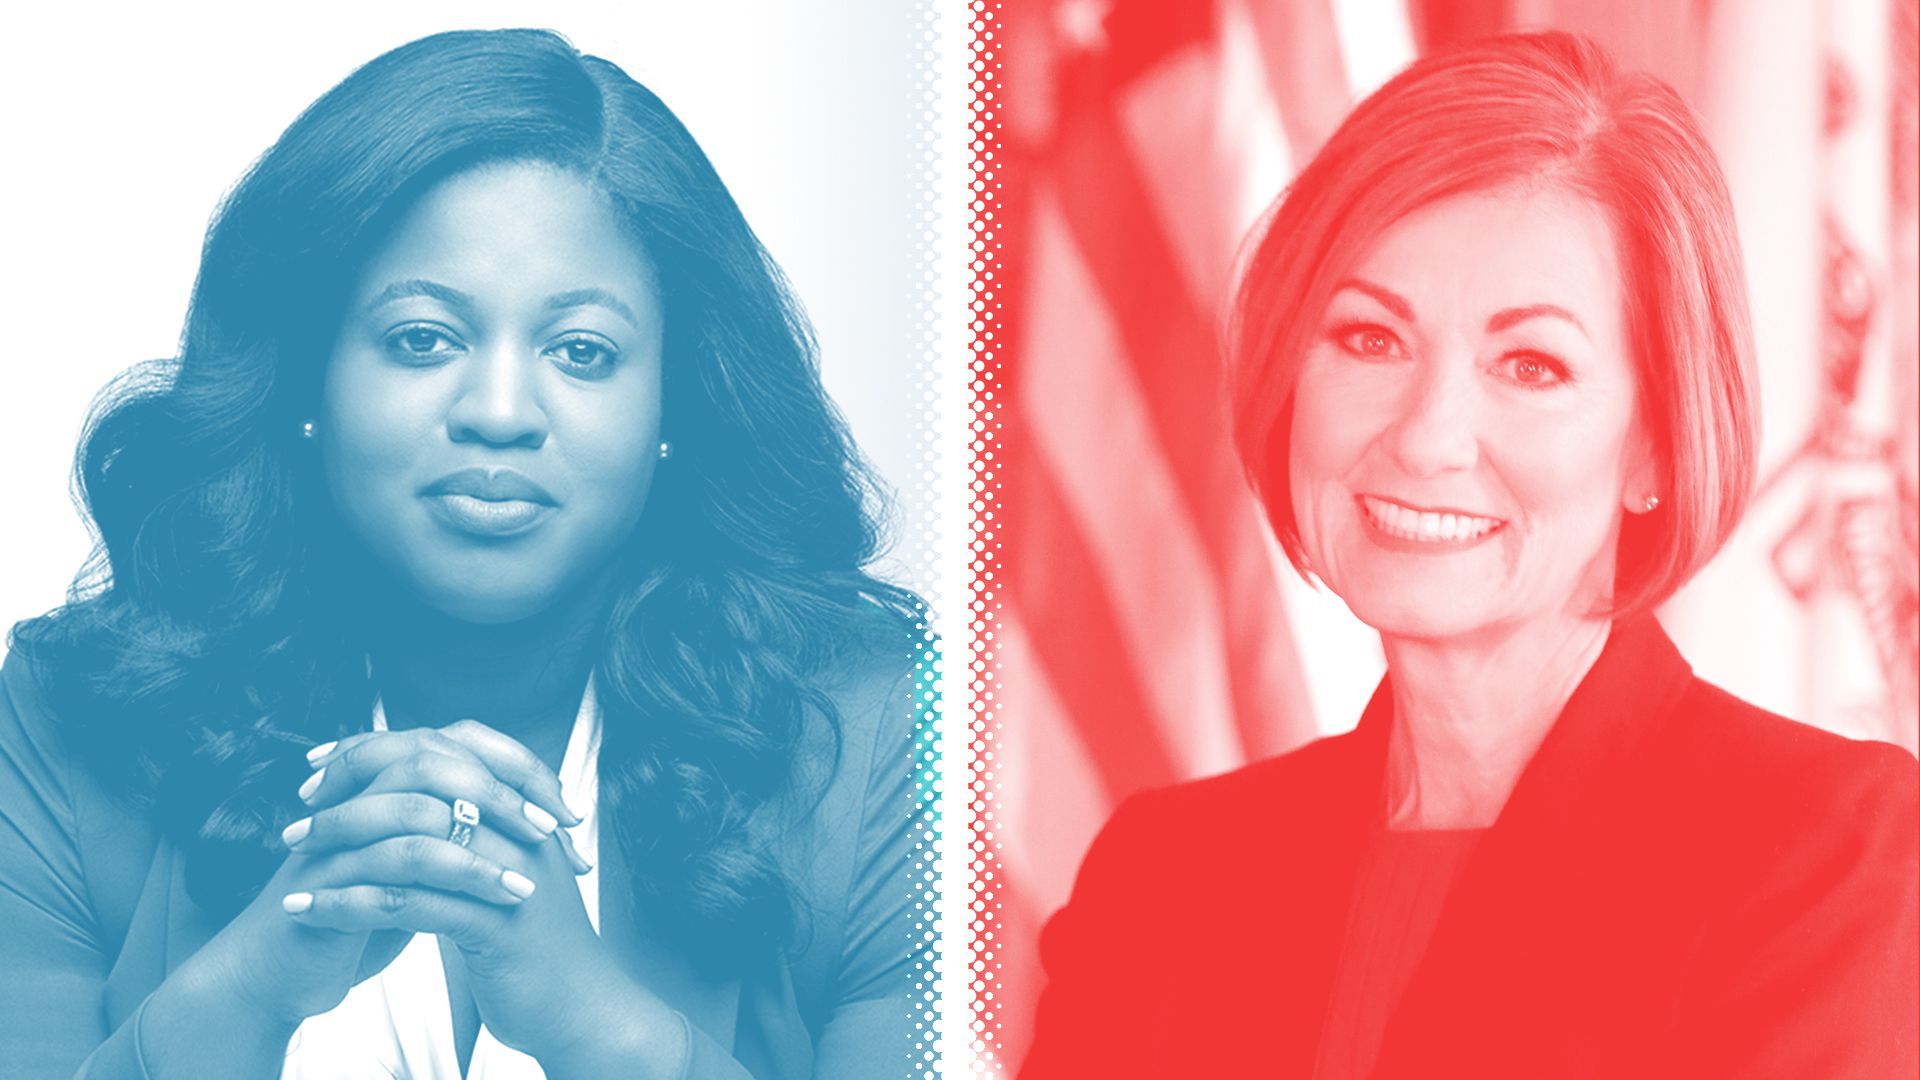 Photo illustration of Deidre DeJear, tinted blue, and Kim Reynolds, tinted red, separated by a white halftone divider